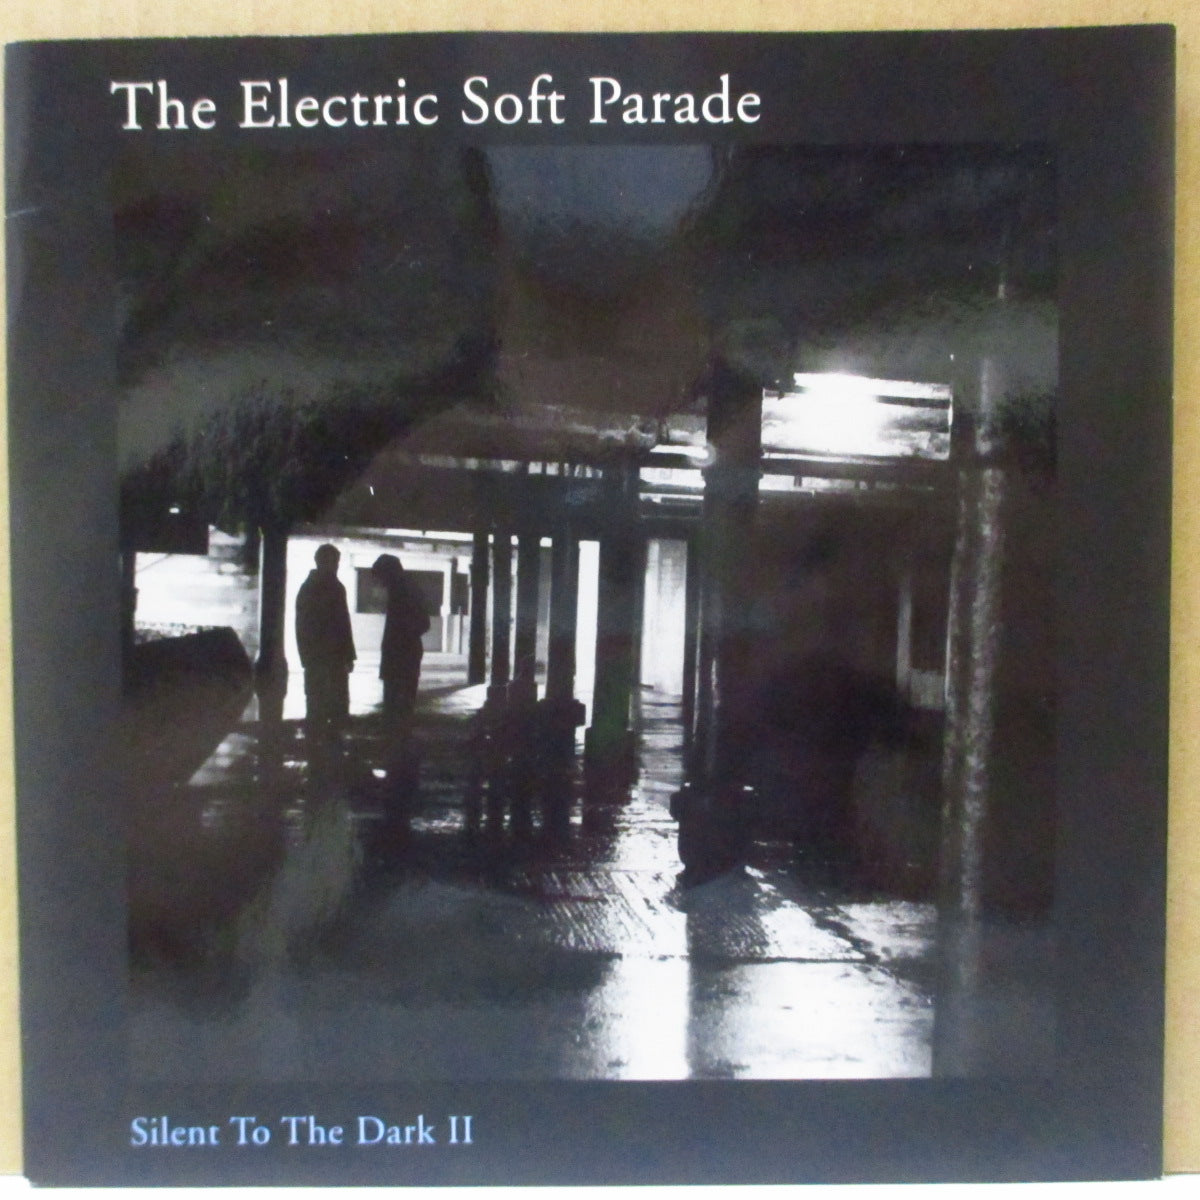 ELECTRIC SOFT PARADE, THE (ジ・エレクトリック・ソフト・パレード) Silent To The Dark II